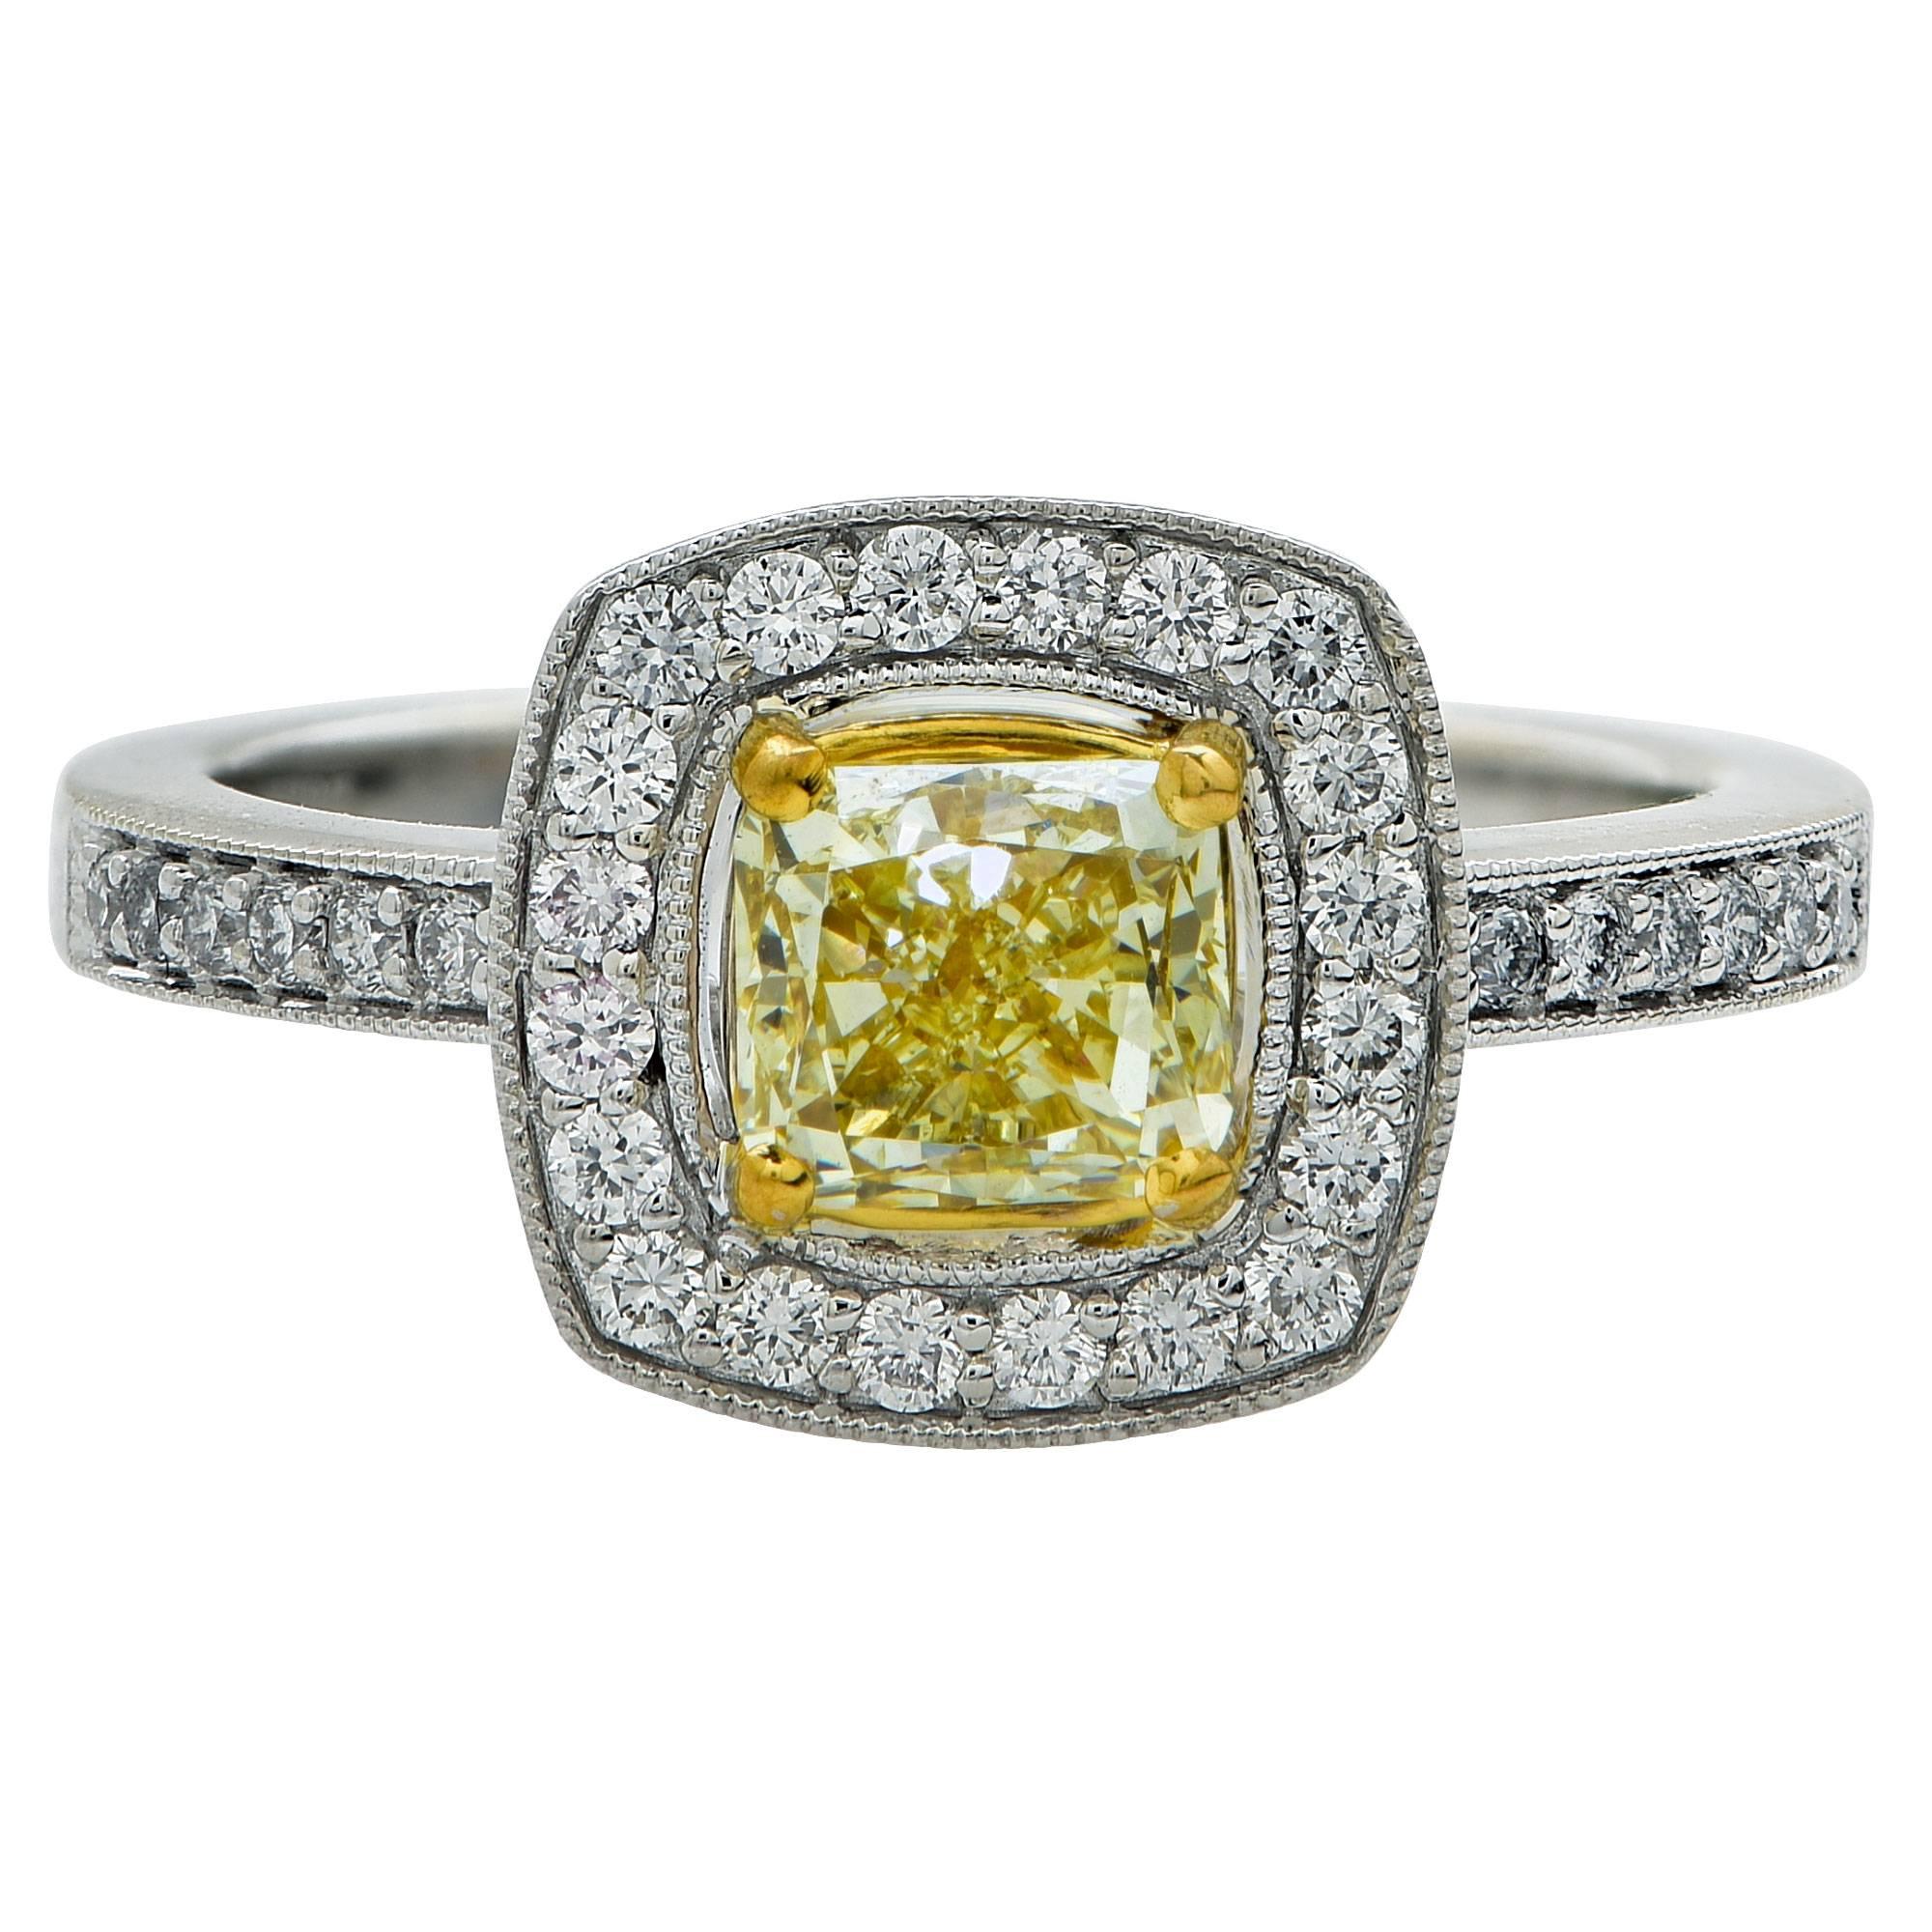 18k white and yellow gold ring featuring a GIA graded light yellow cushion cut diamond weighing 1.01cts and VVS2 clarity which is accented by .31cts of round brilliant cut diamonds G color, VS clarity.